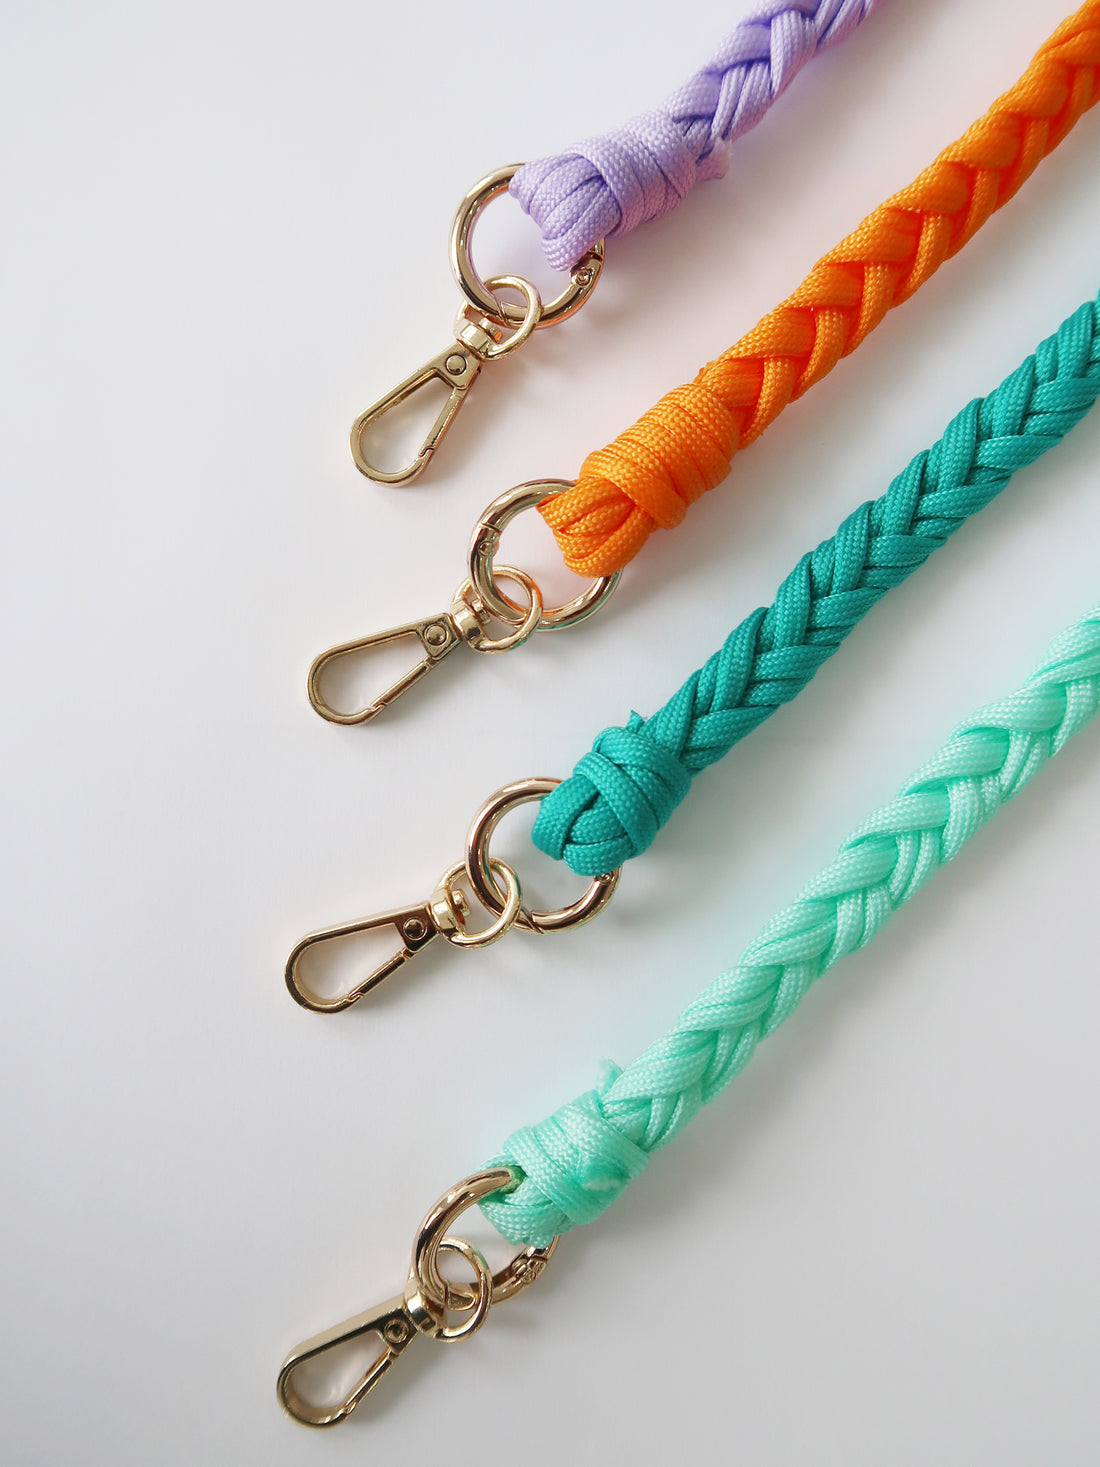 Stella - Braided Cord Phone Chain with Golden Carabiners